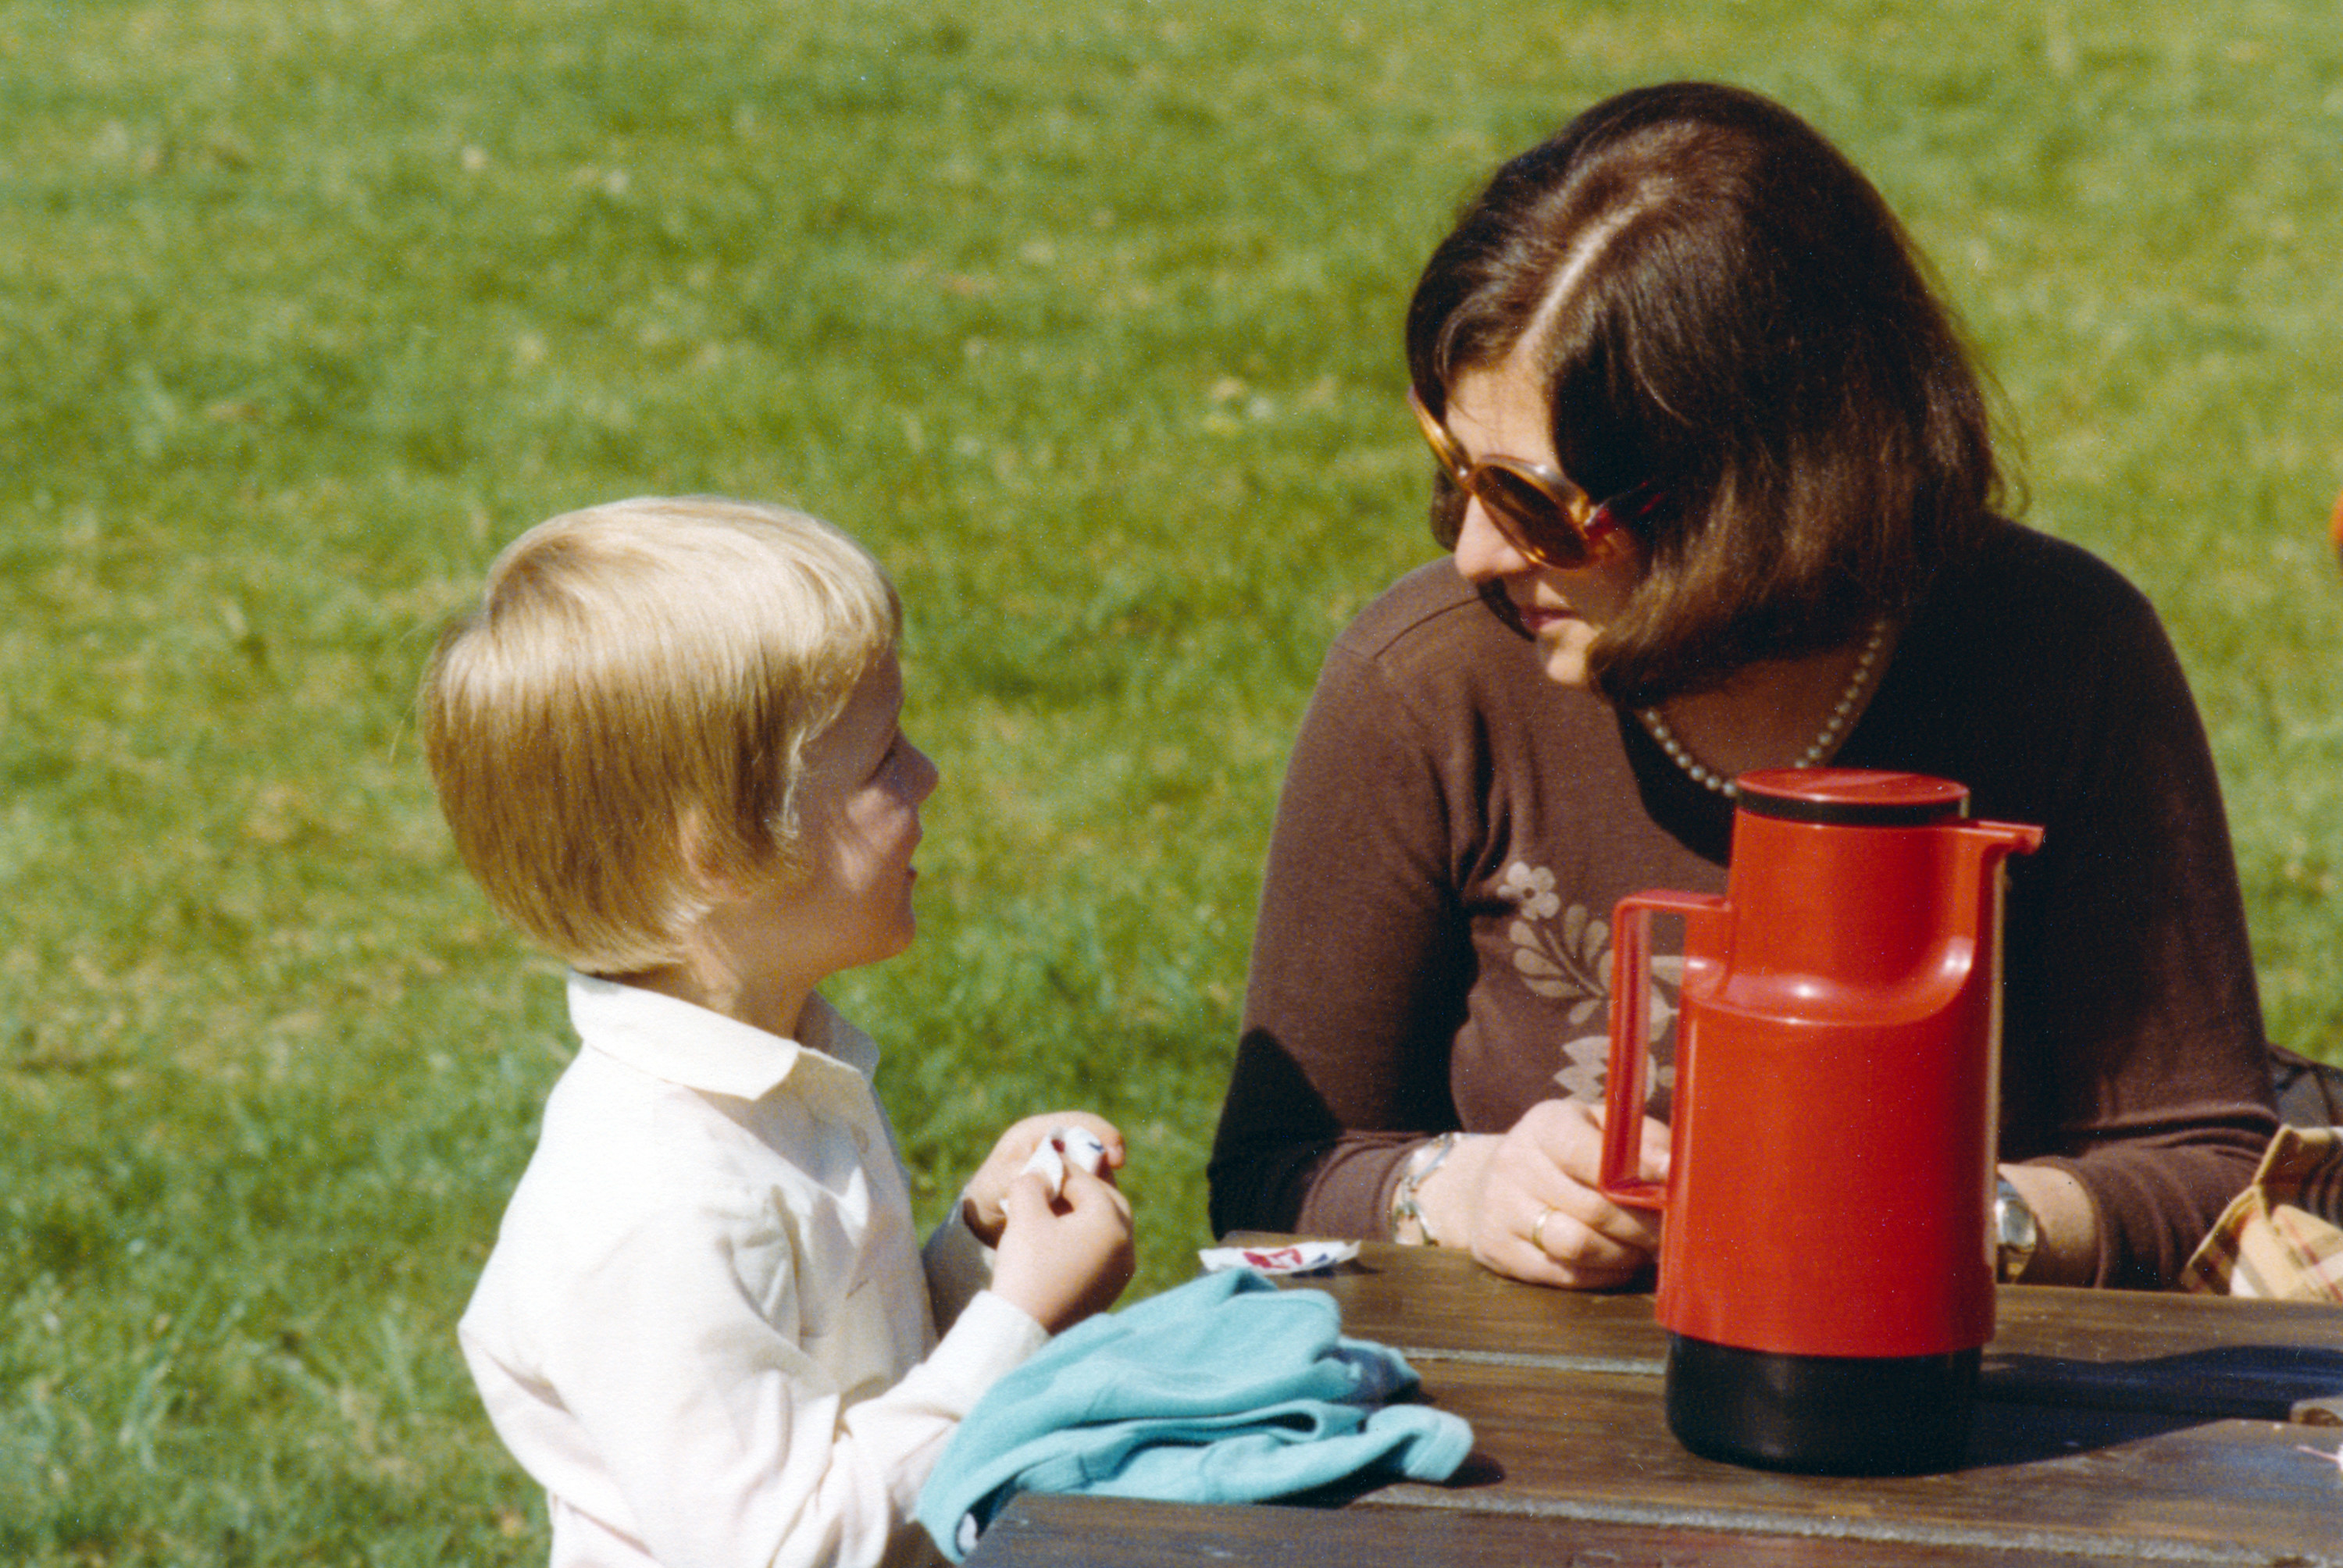 A woman sitting at a table with her child outside